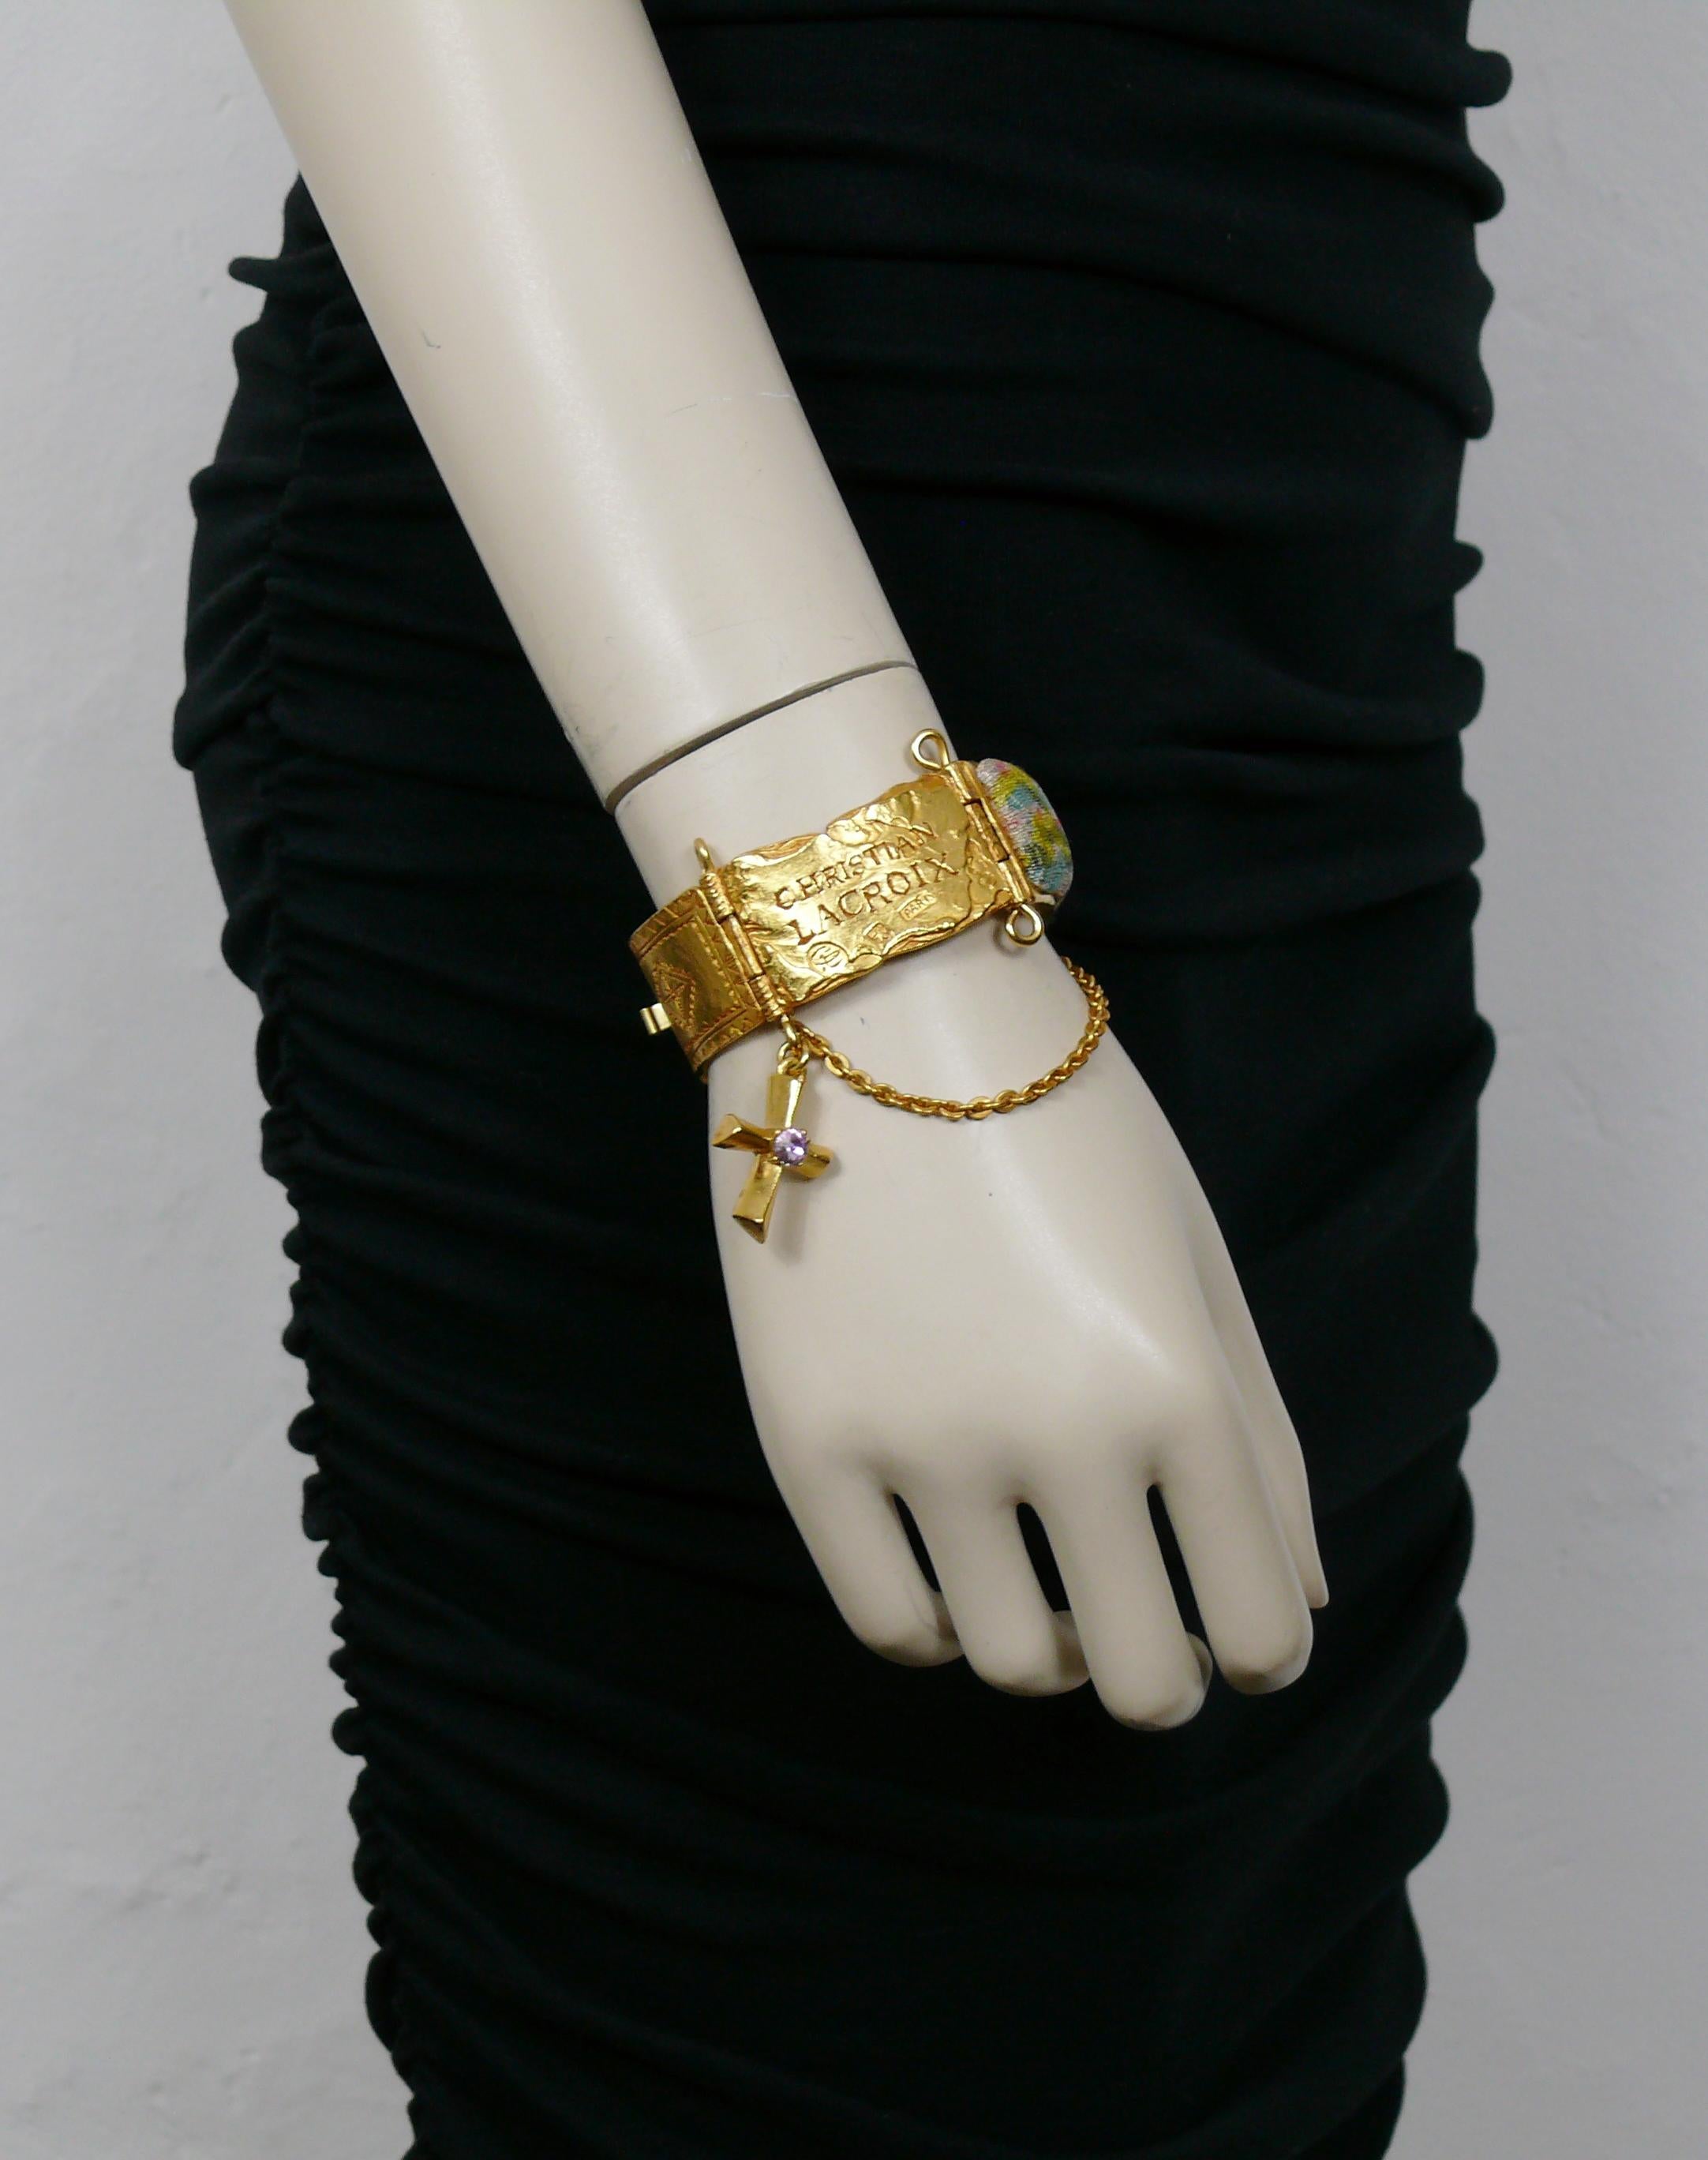 CHRISTIAN LACROIX vintage gold tone bracelet featuring an ID tag link, crystals, links covered with fabrics, chain and cross charm.

Marked CHRISTIAN LACROIX CL Made in France.

Indicative measurements : length approx. 16.5 cm (6.50 inches) / width